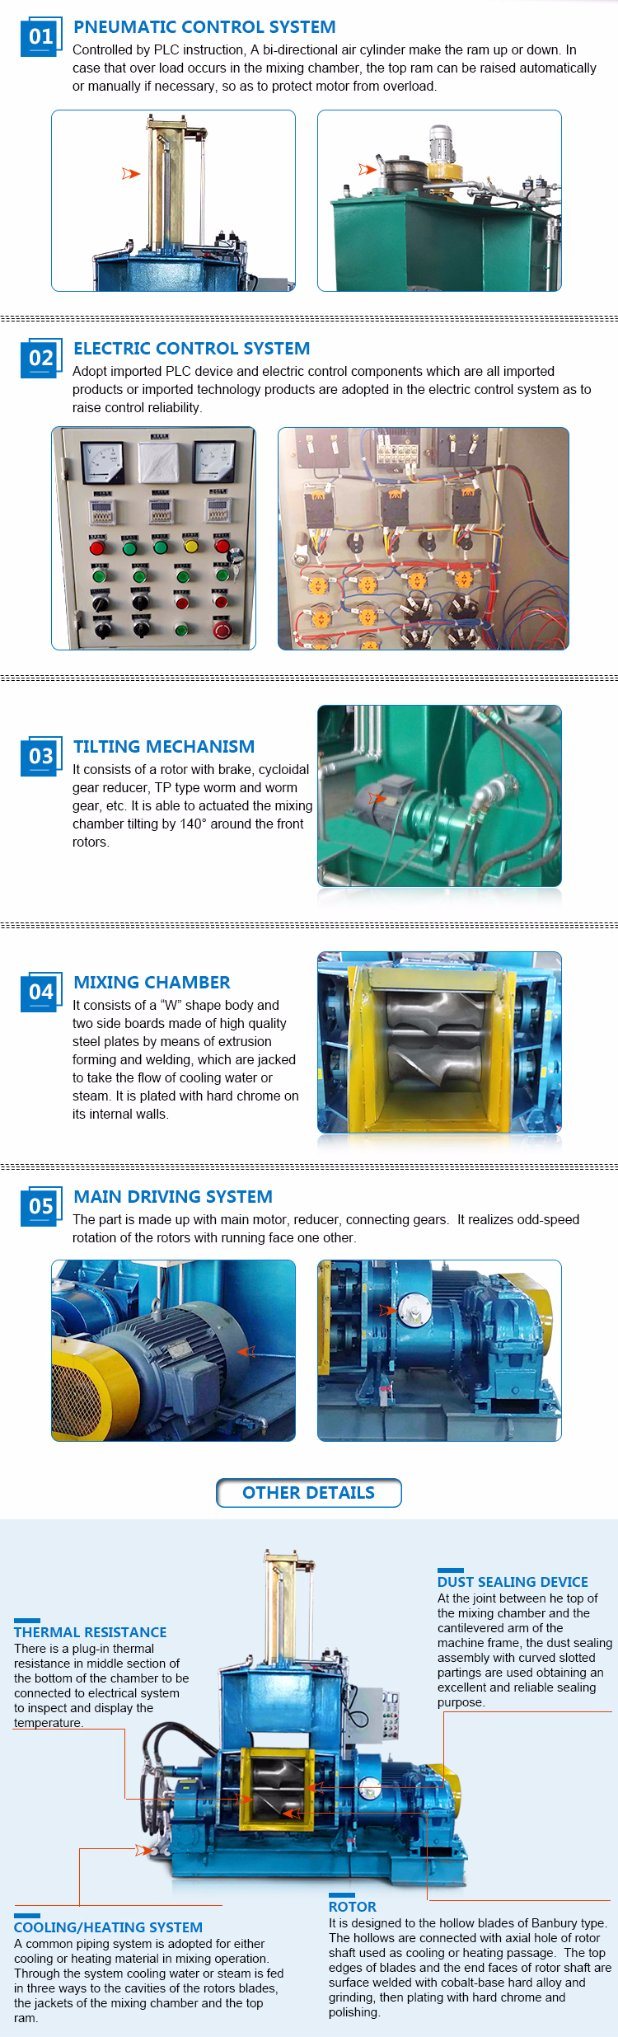 Rubber Banbury Kneader Machine for Rubber or Plastic Internal Mixing